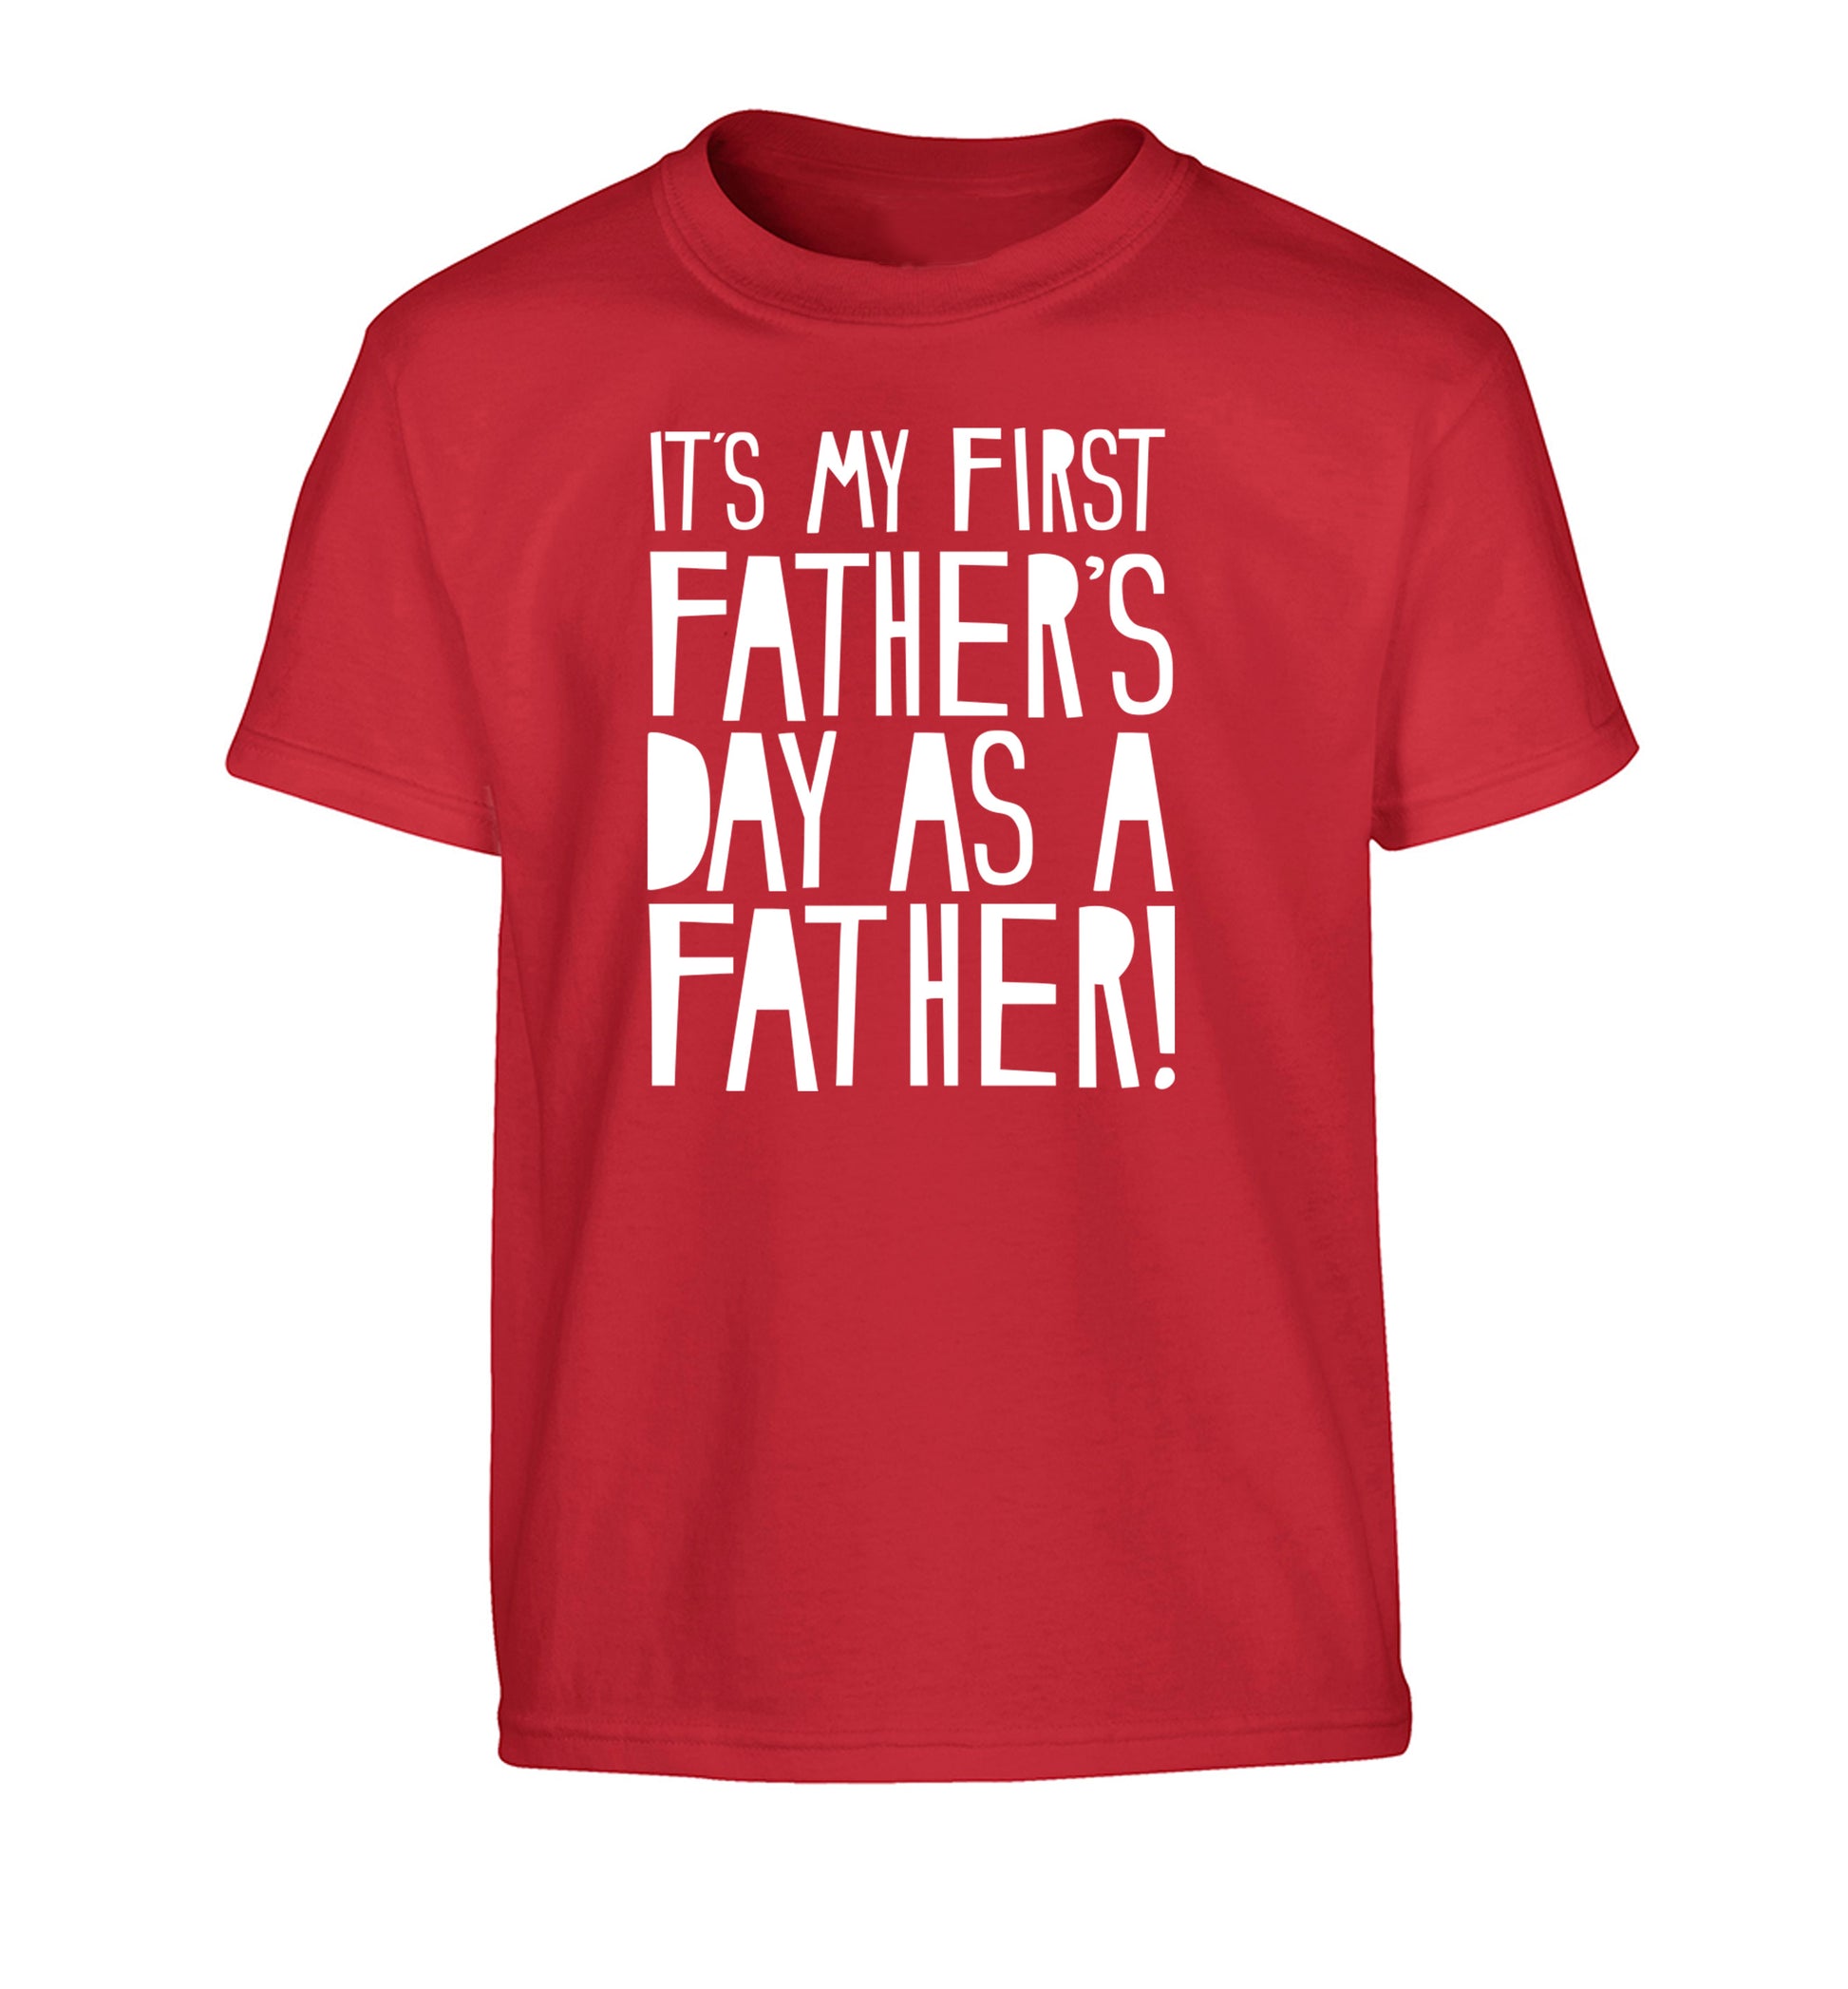 It's my first Father's Day as a father! Children's red Tshirt 12-13 Years